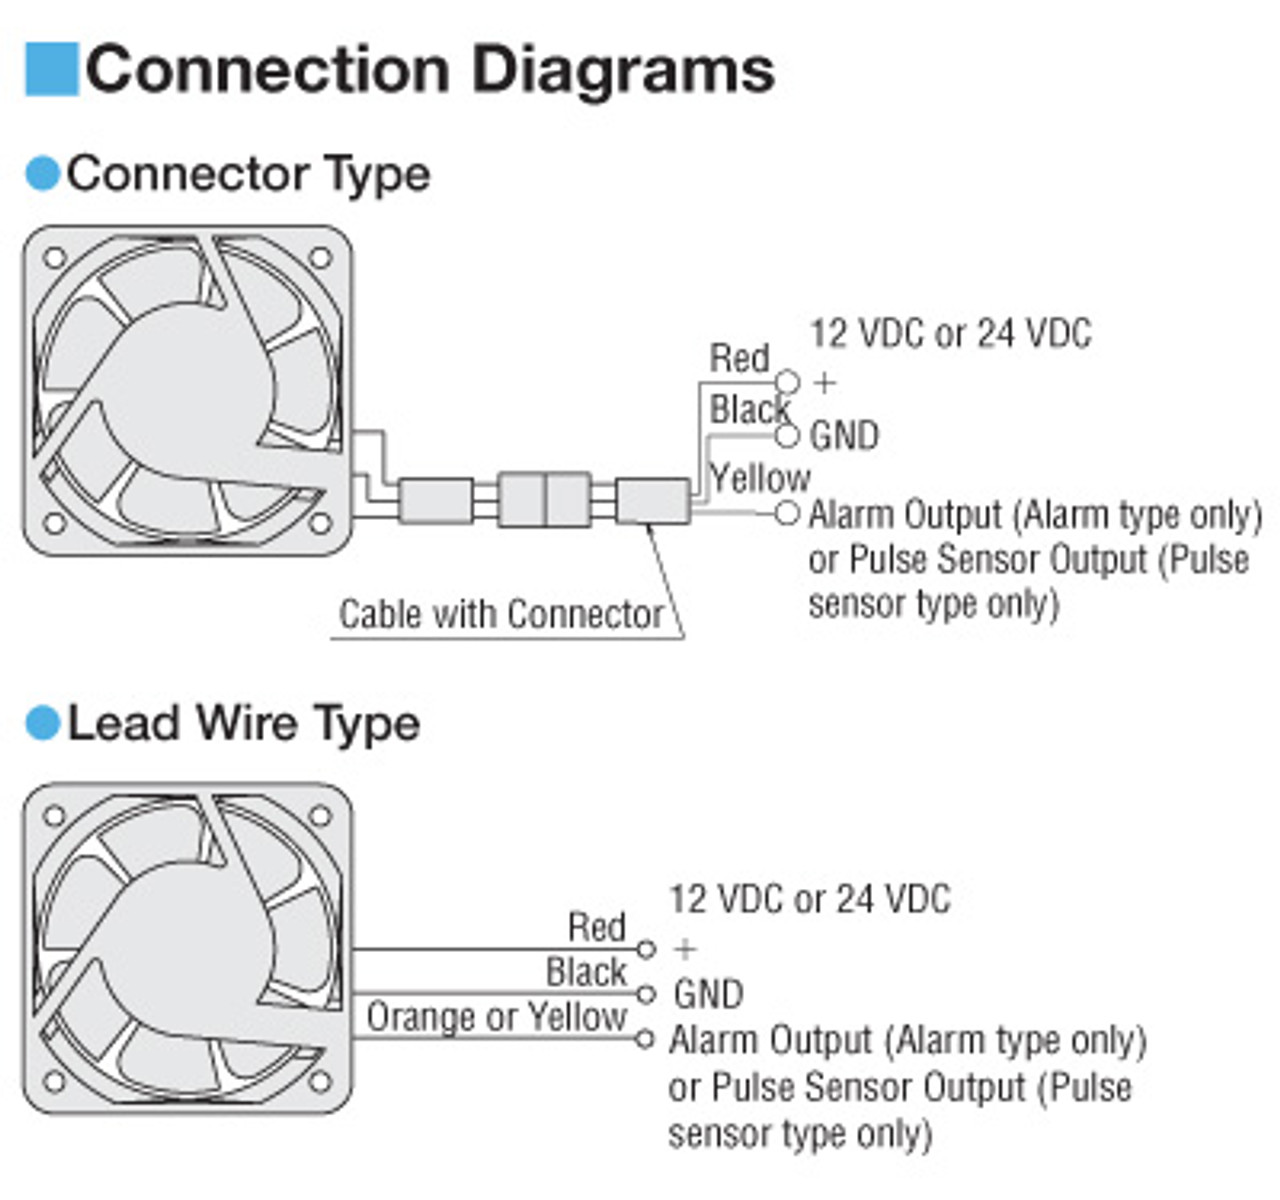 MD625B-24 - Connection